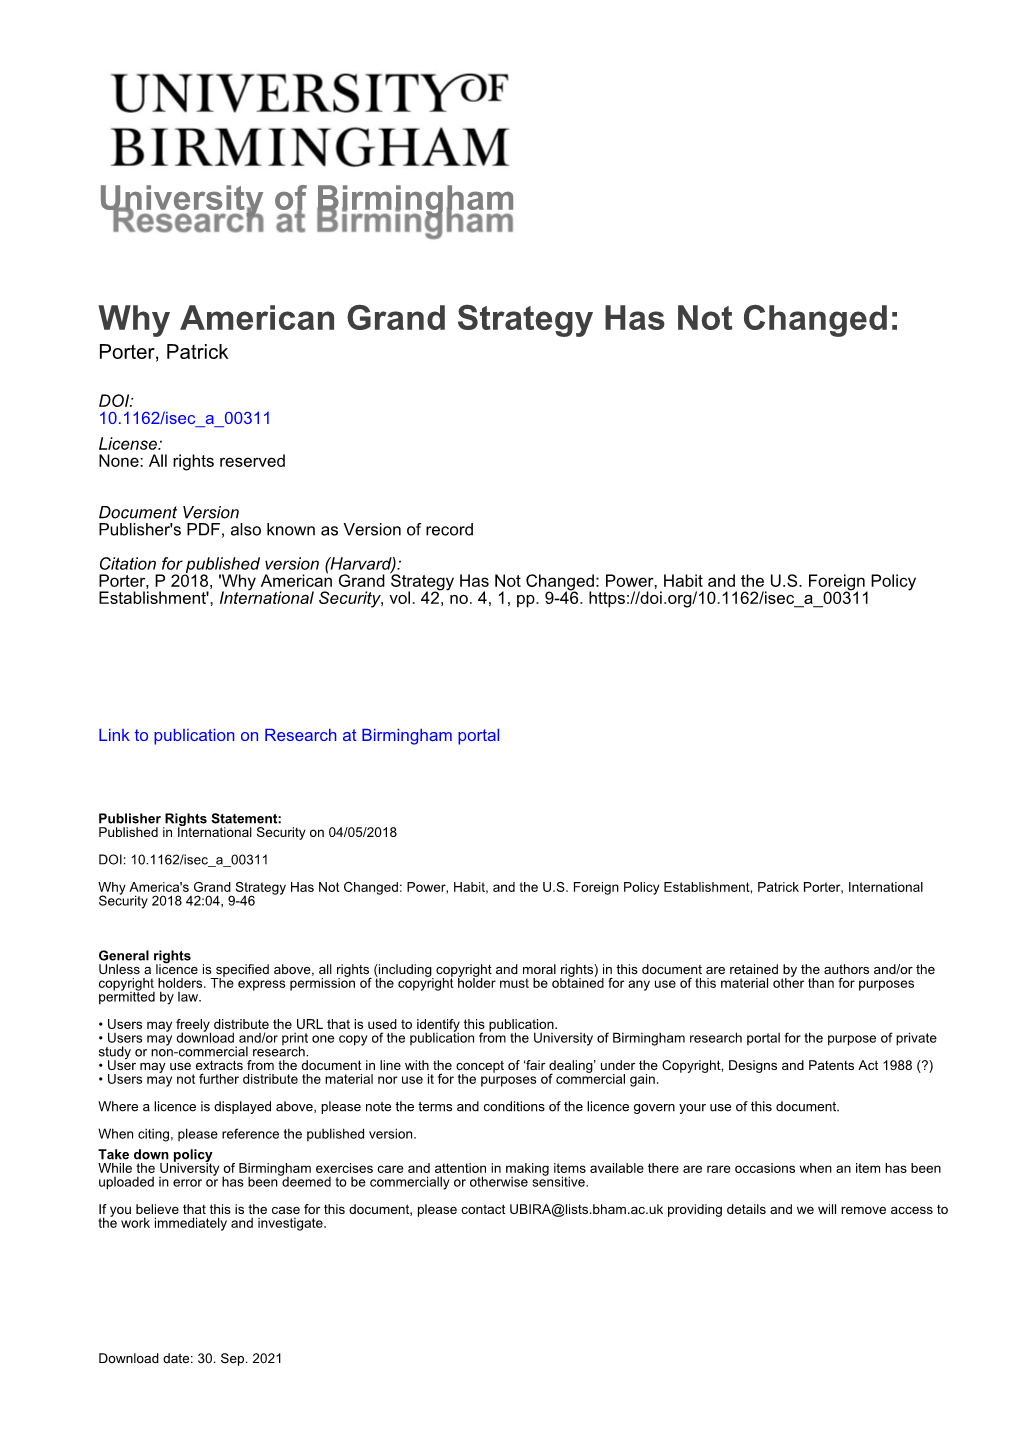 Why American Grand Strategy Has Not Changed: Porter, Patrick